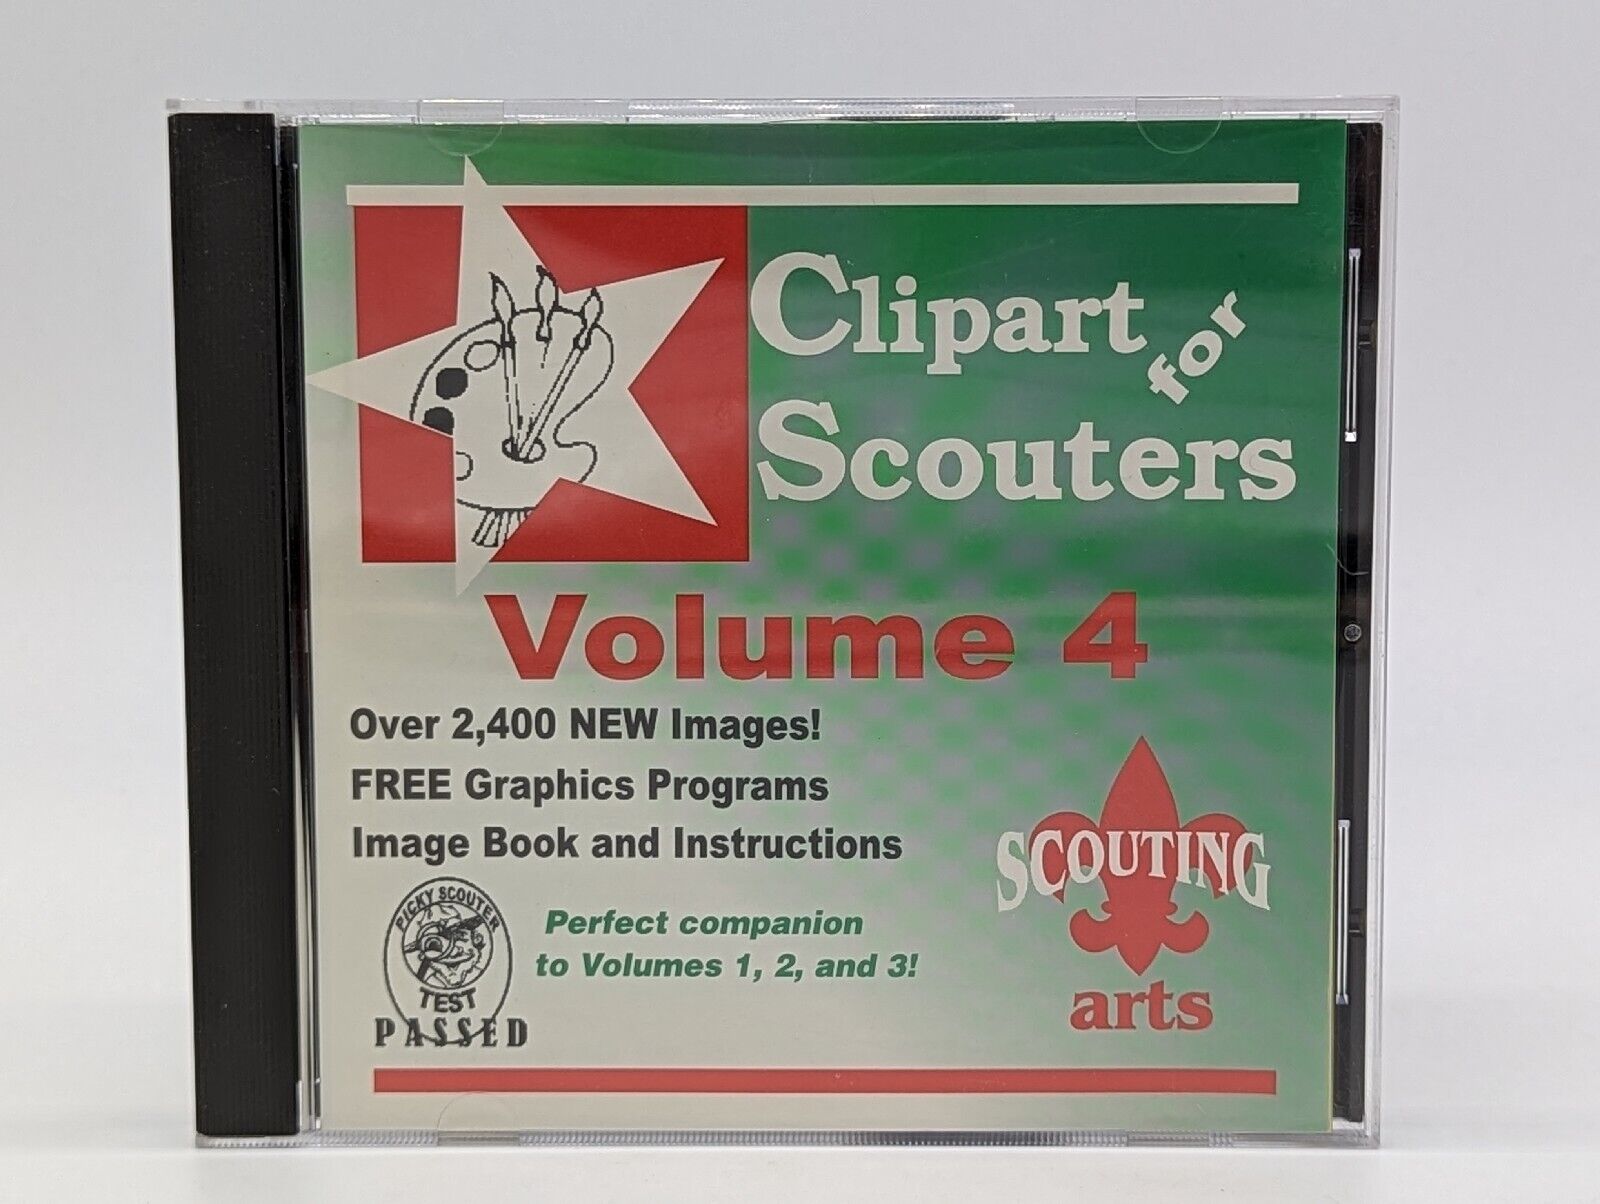 Clipart For Scouters Volume 4 CD-ROM Windows 3.1 PC Scouting Arts 2000 Boy Scout